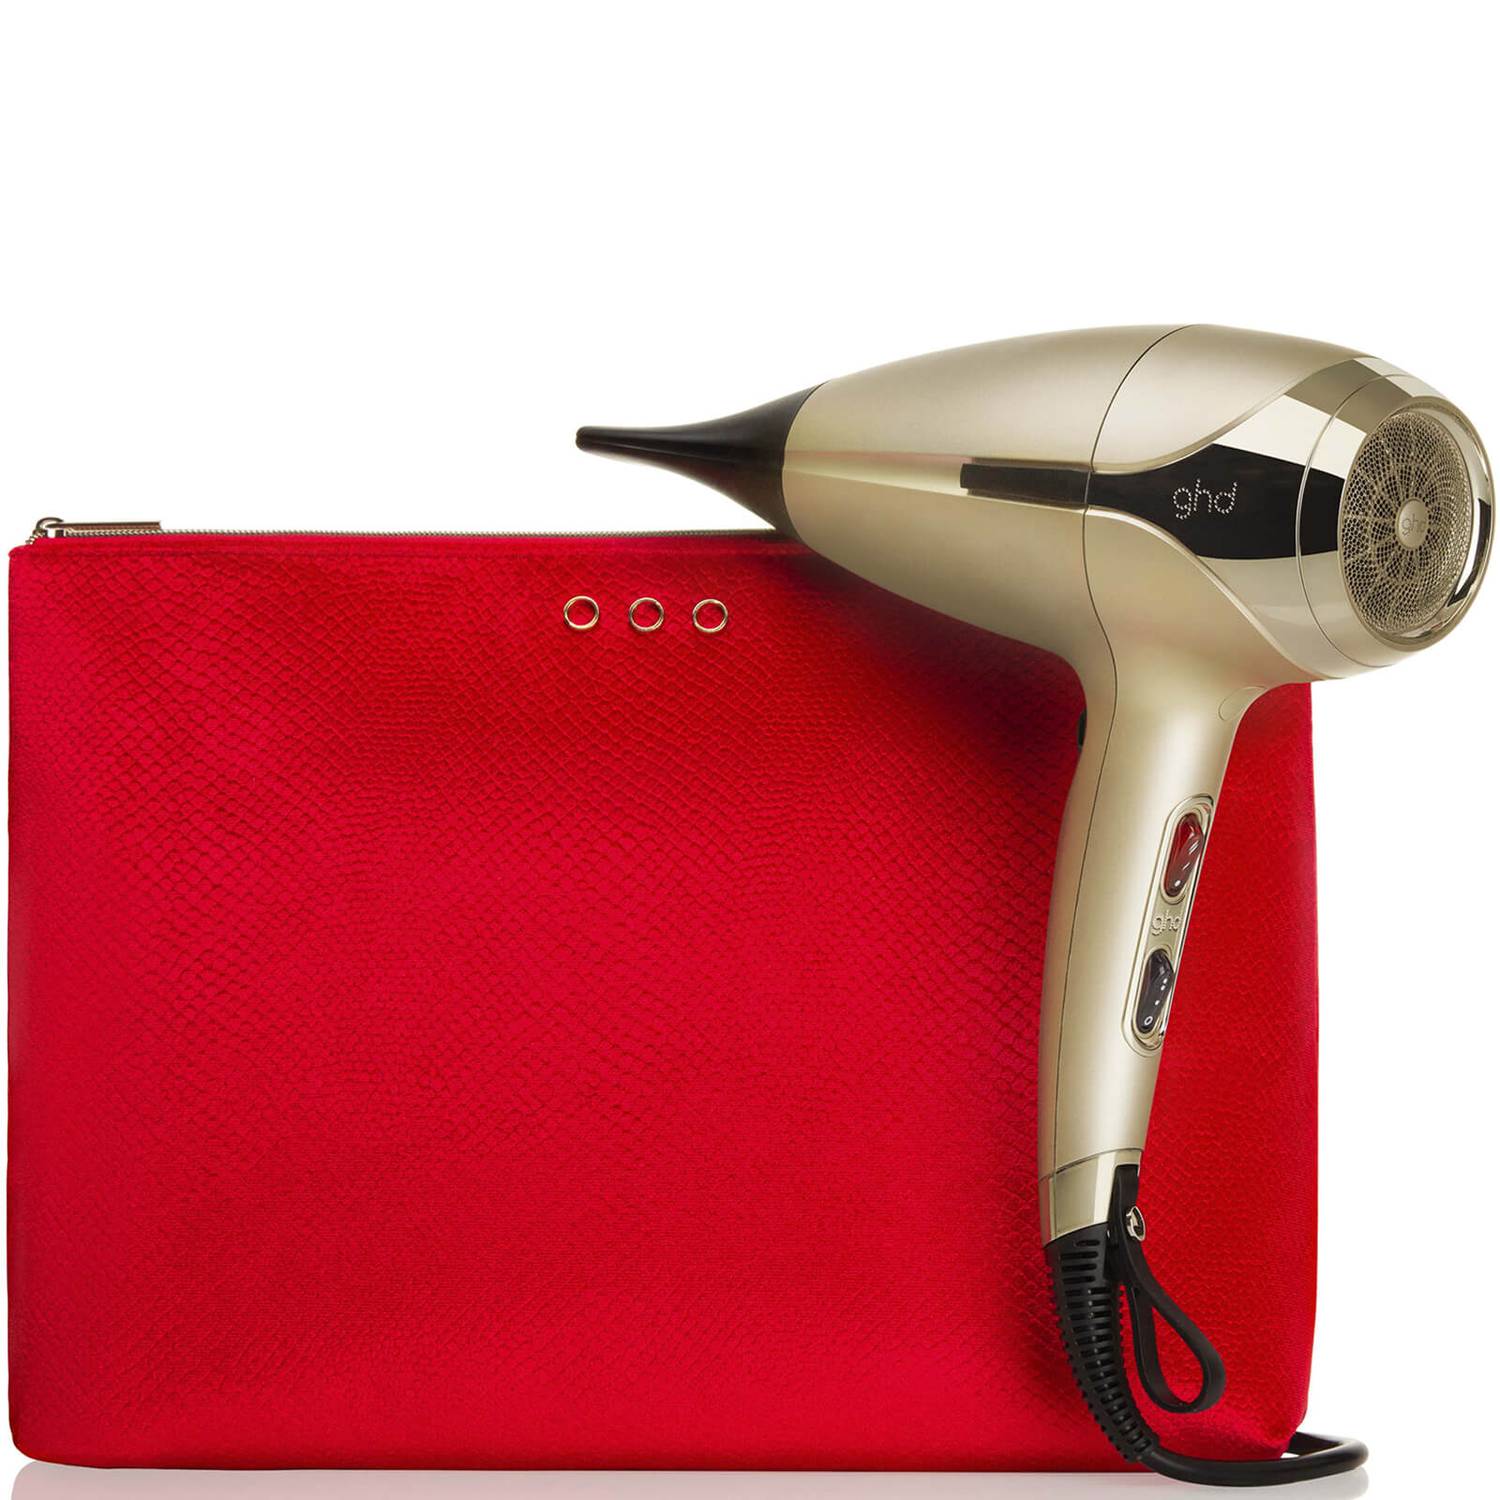 ghd Helios 1875W Advanced Professional Hair Dryer - Grand-Luxe Collection - Blend Box